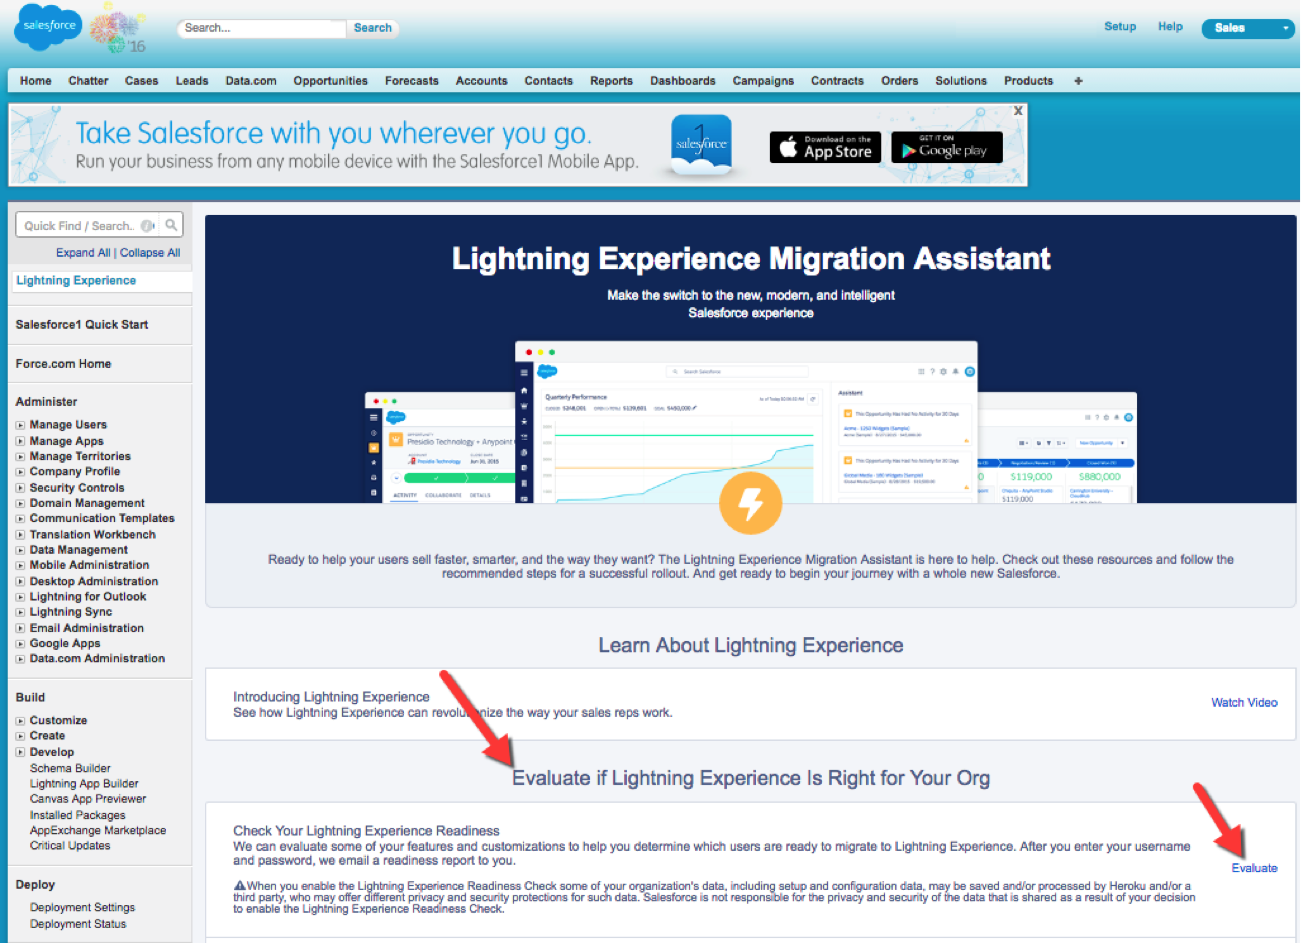 How Do I Know If My Org Is Ready for Lightning Experience?